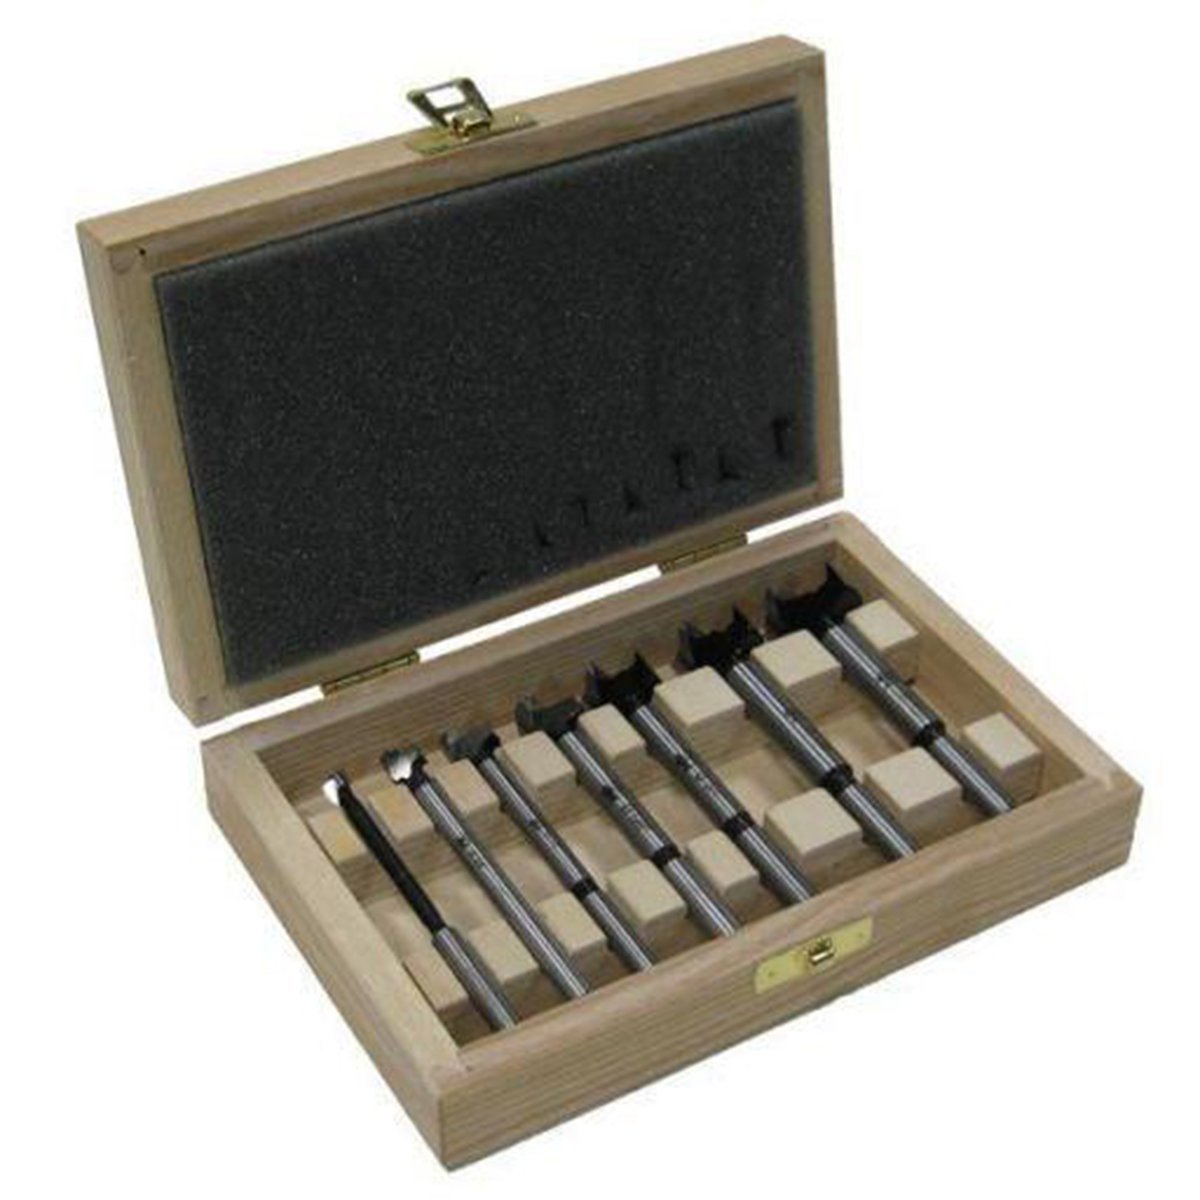 Set of 7 Fisch Tools Wave Cutter Forstner Bits in a wooden case for protection and storage. 1/4 to 1 inch diameter bits.